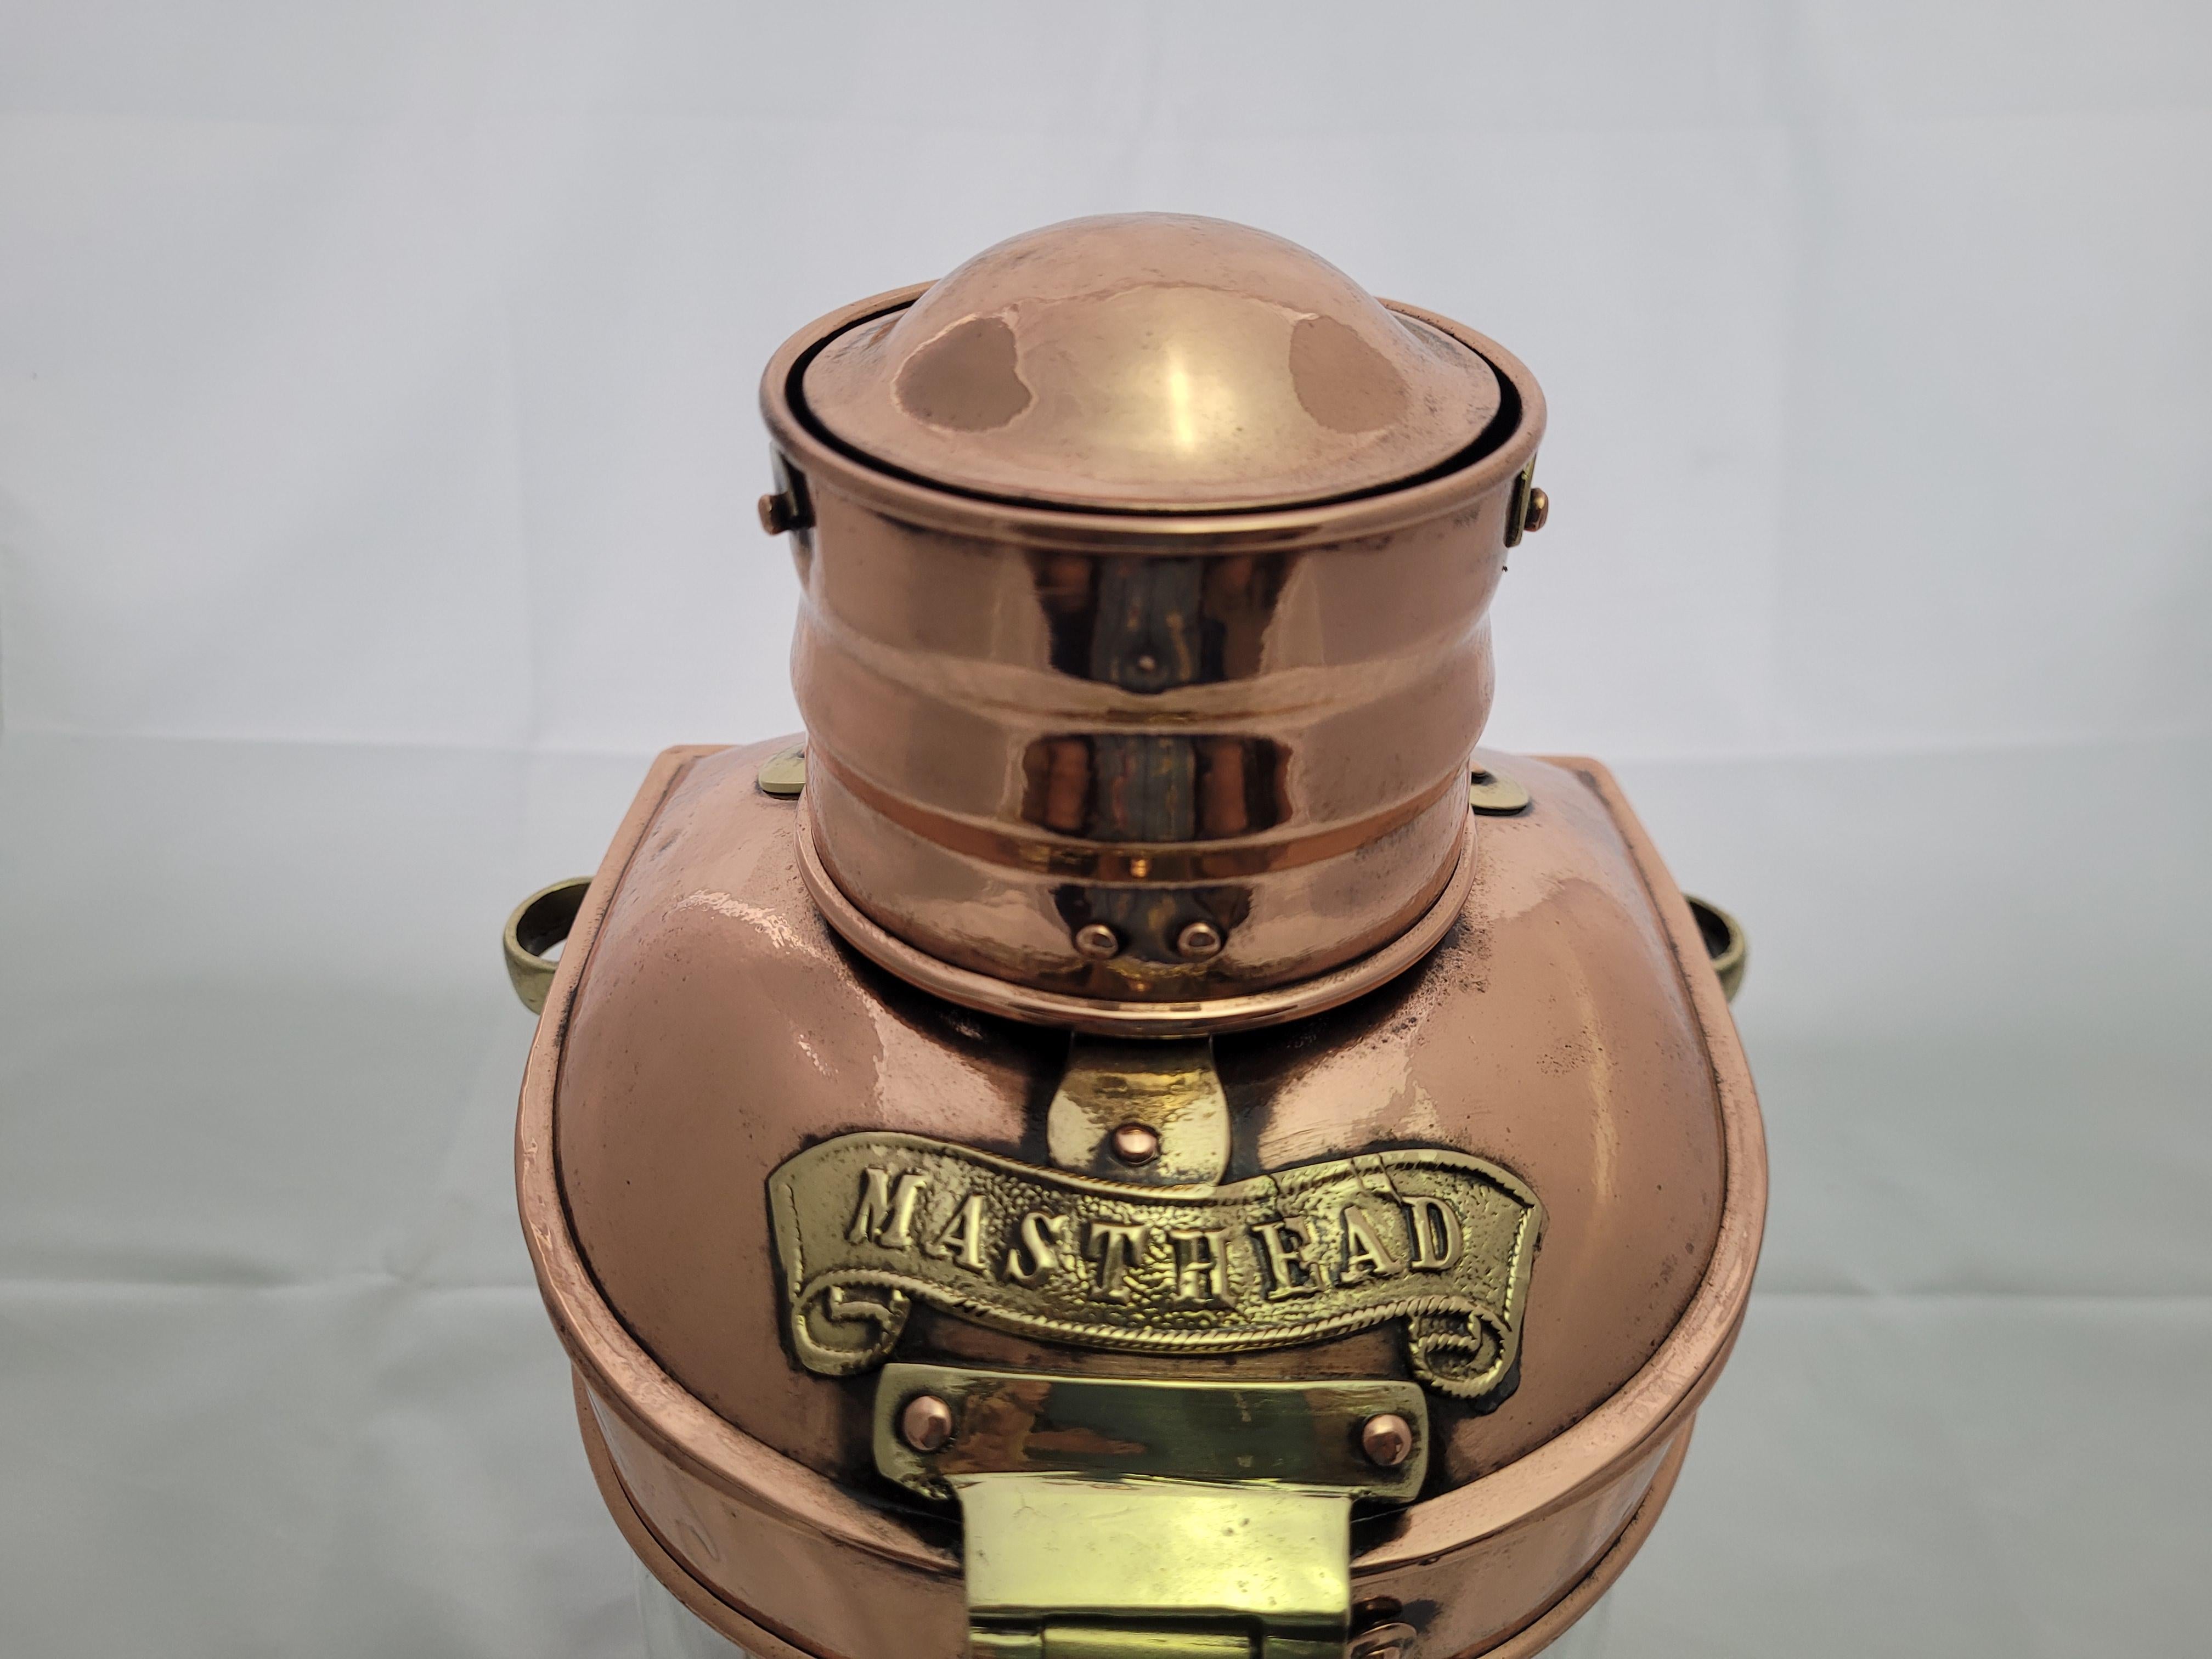 British Ships Masthead Lantern In Good Condition For Sale In Norwell, MA